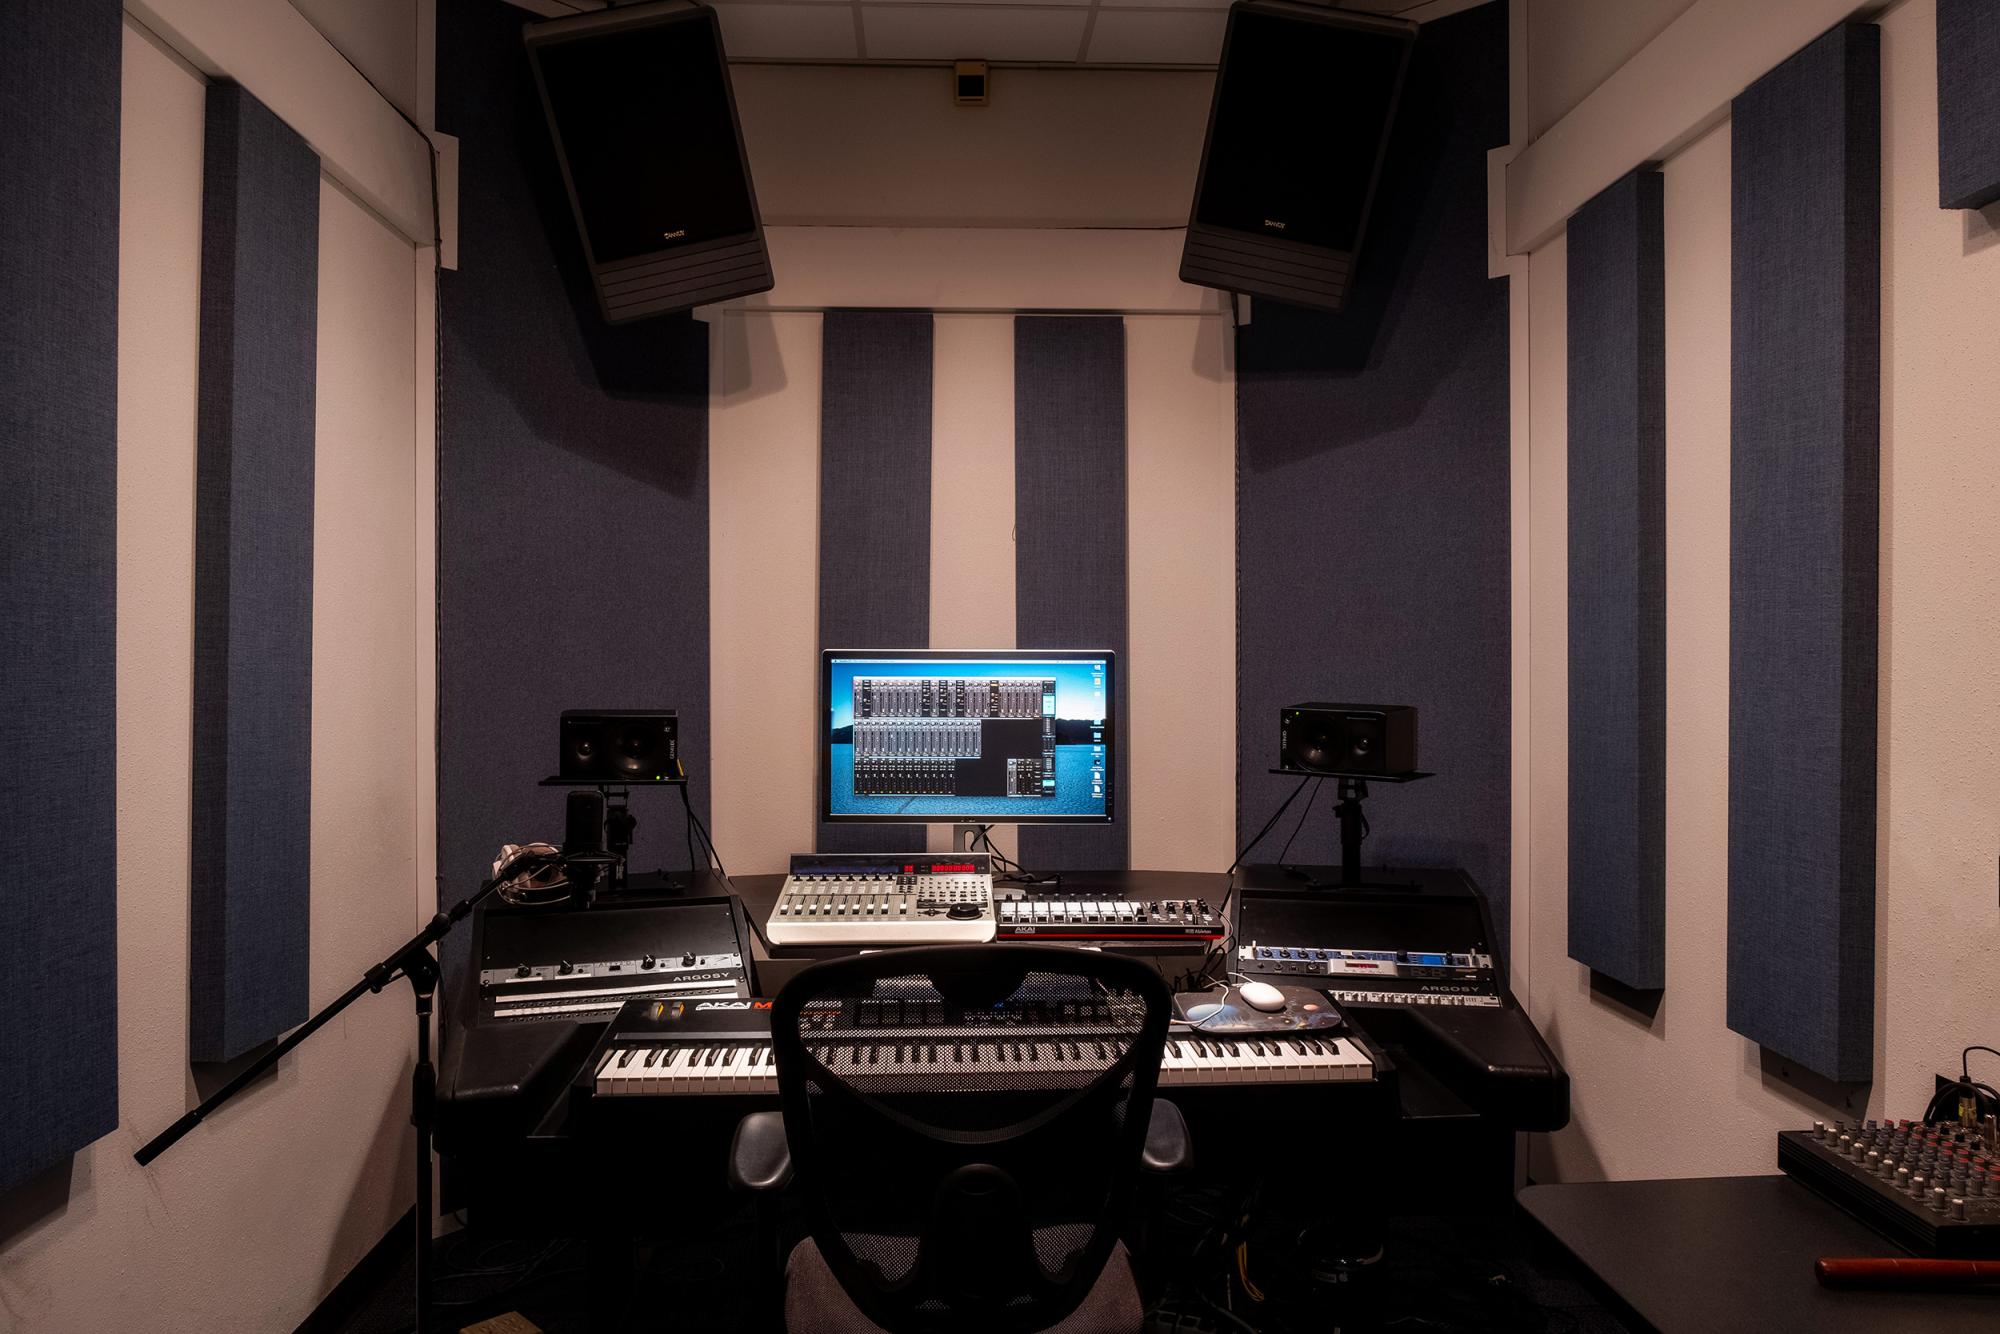 A room with acoustic tiles and a large electronic music workstation